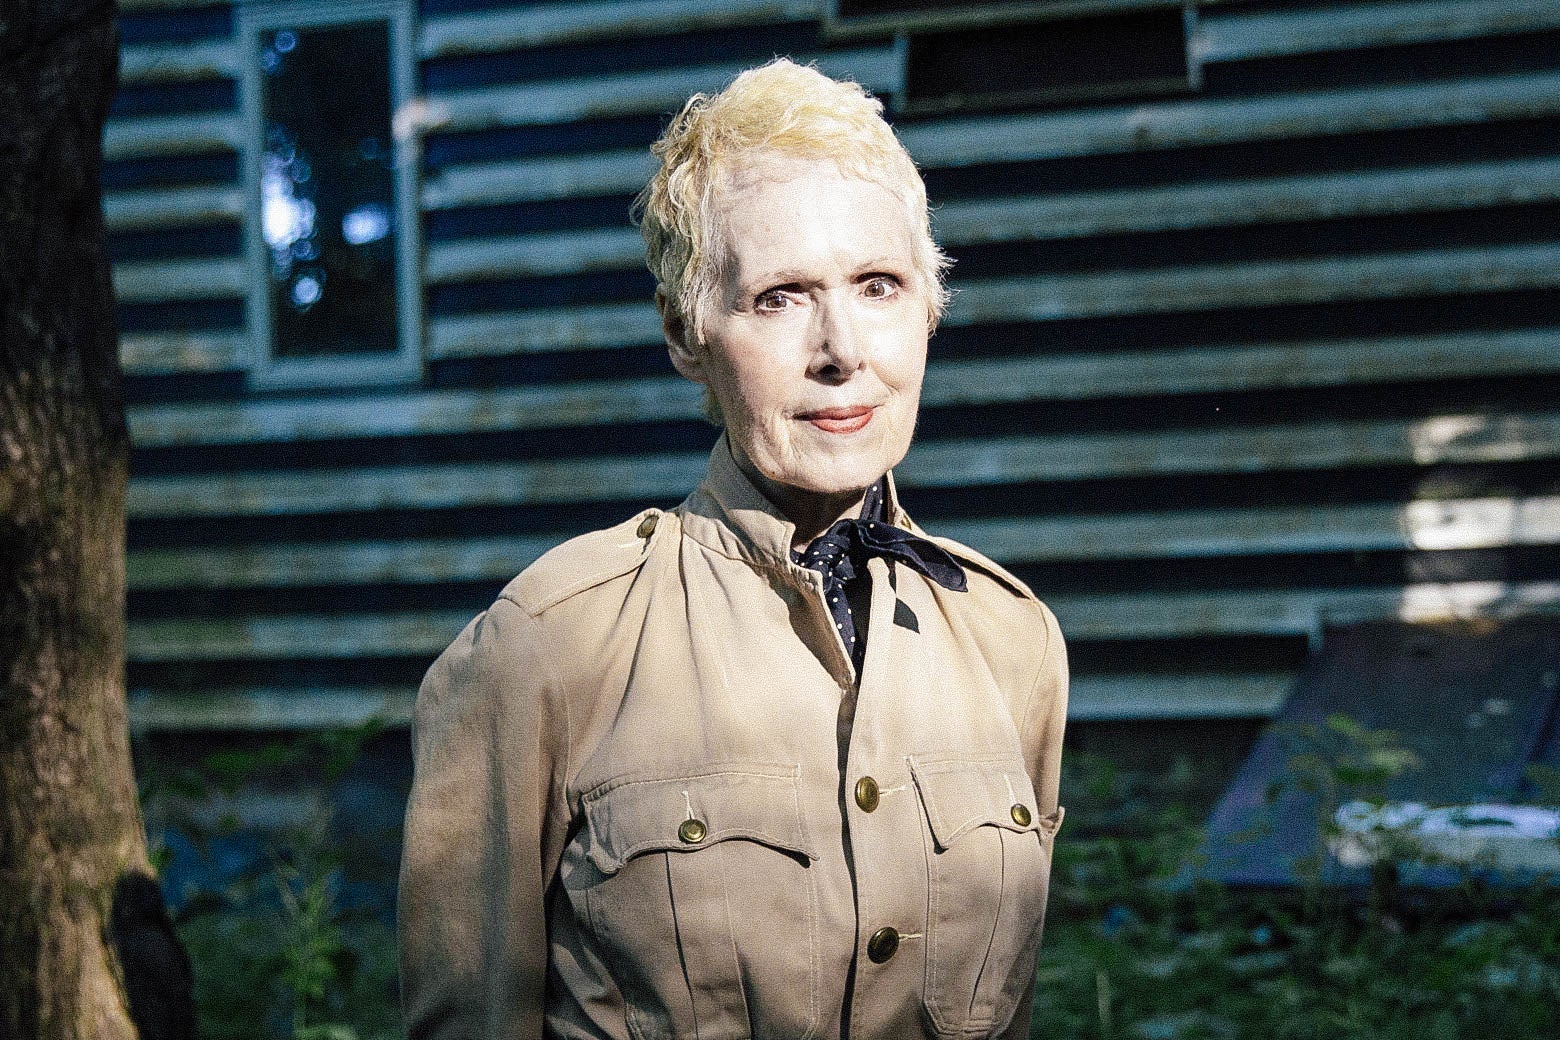 E. Jean Carroll at her home in Warwick, New York.